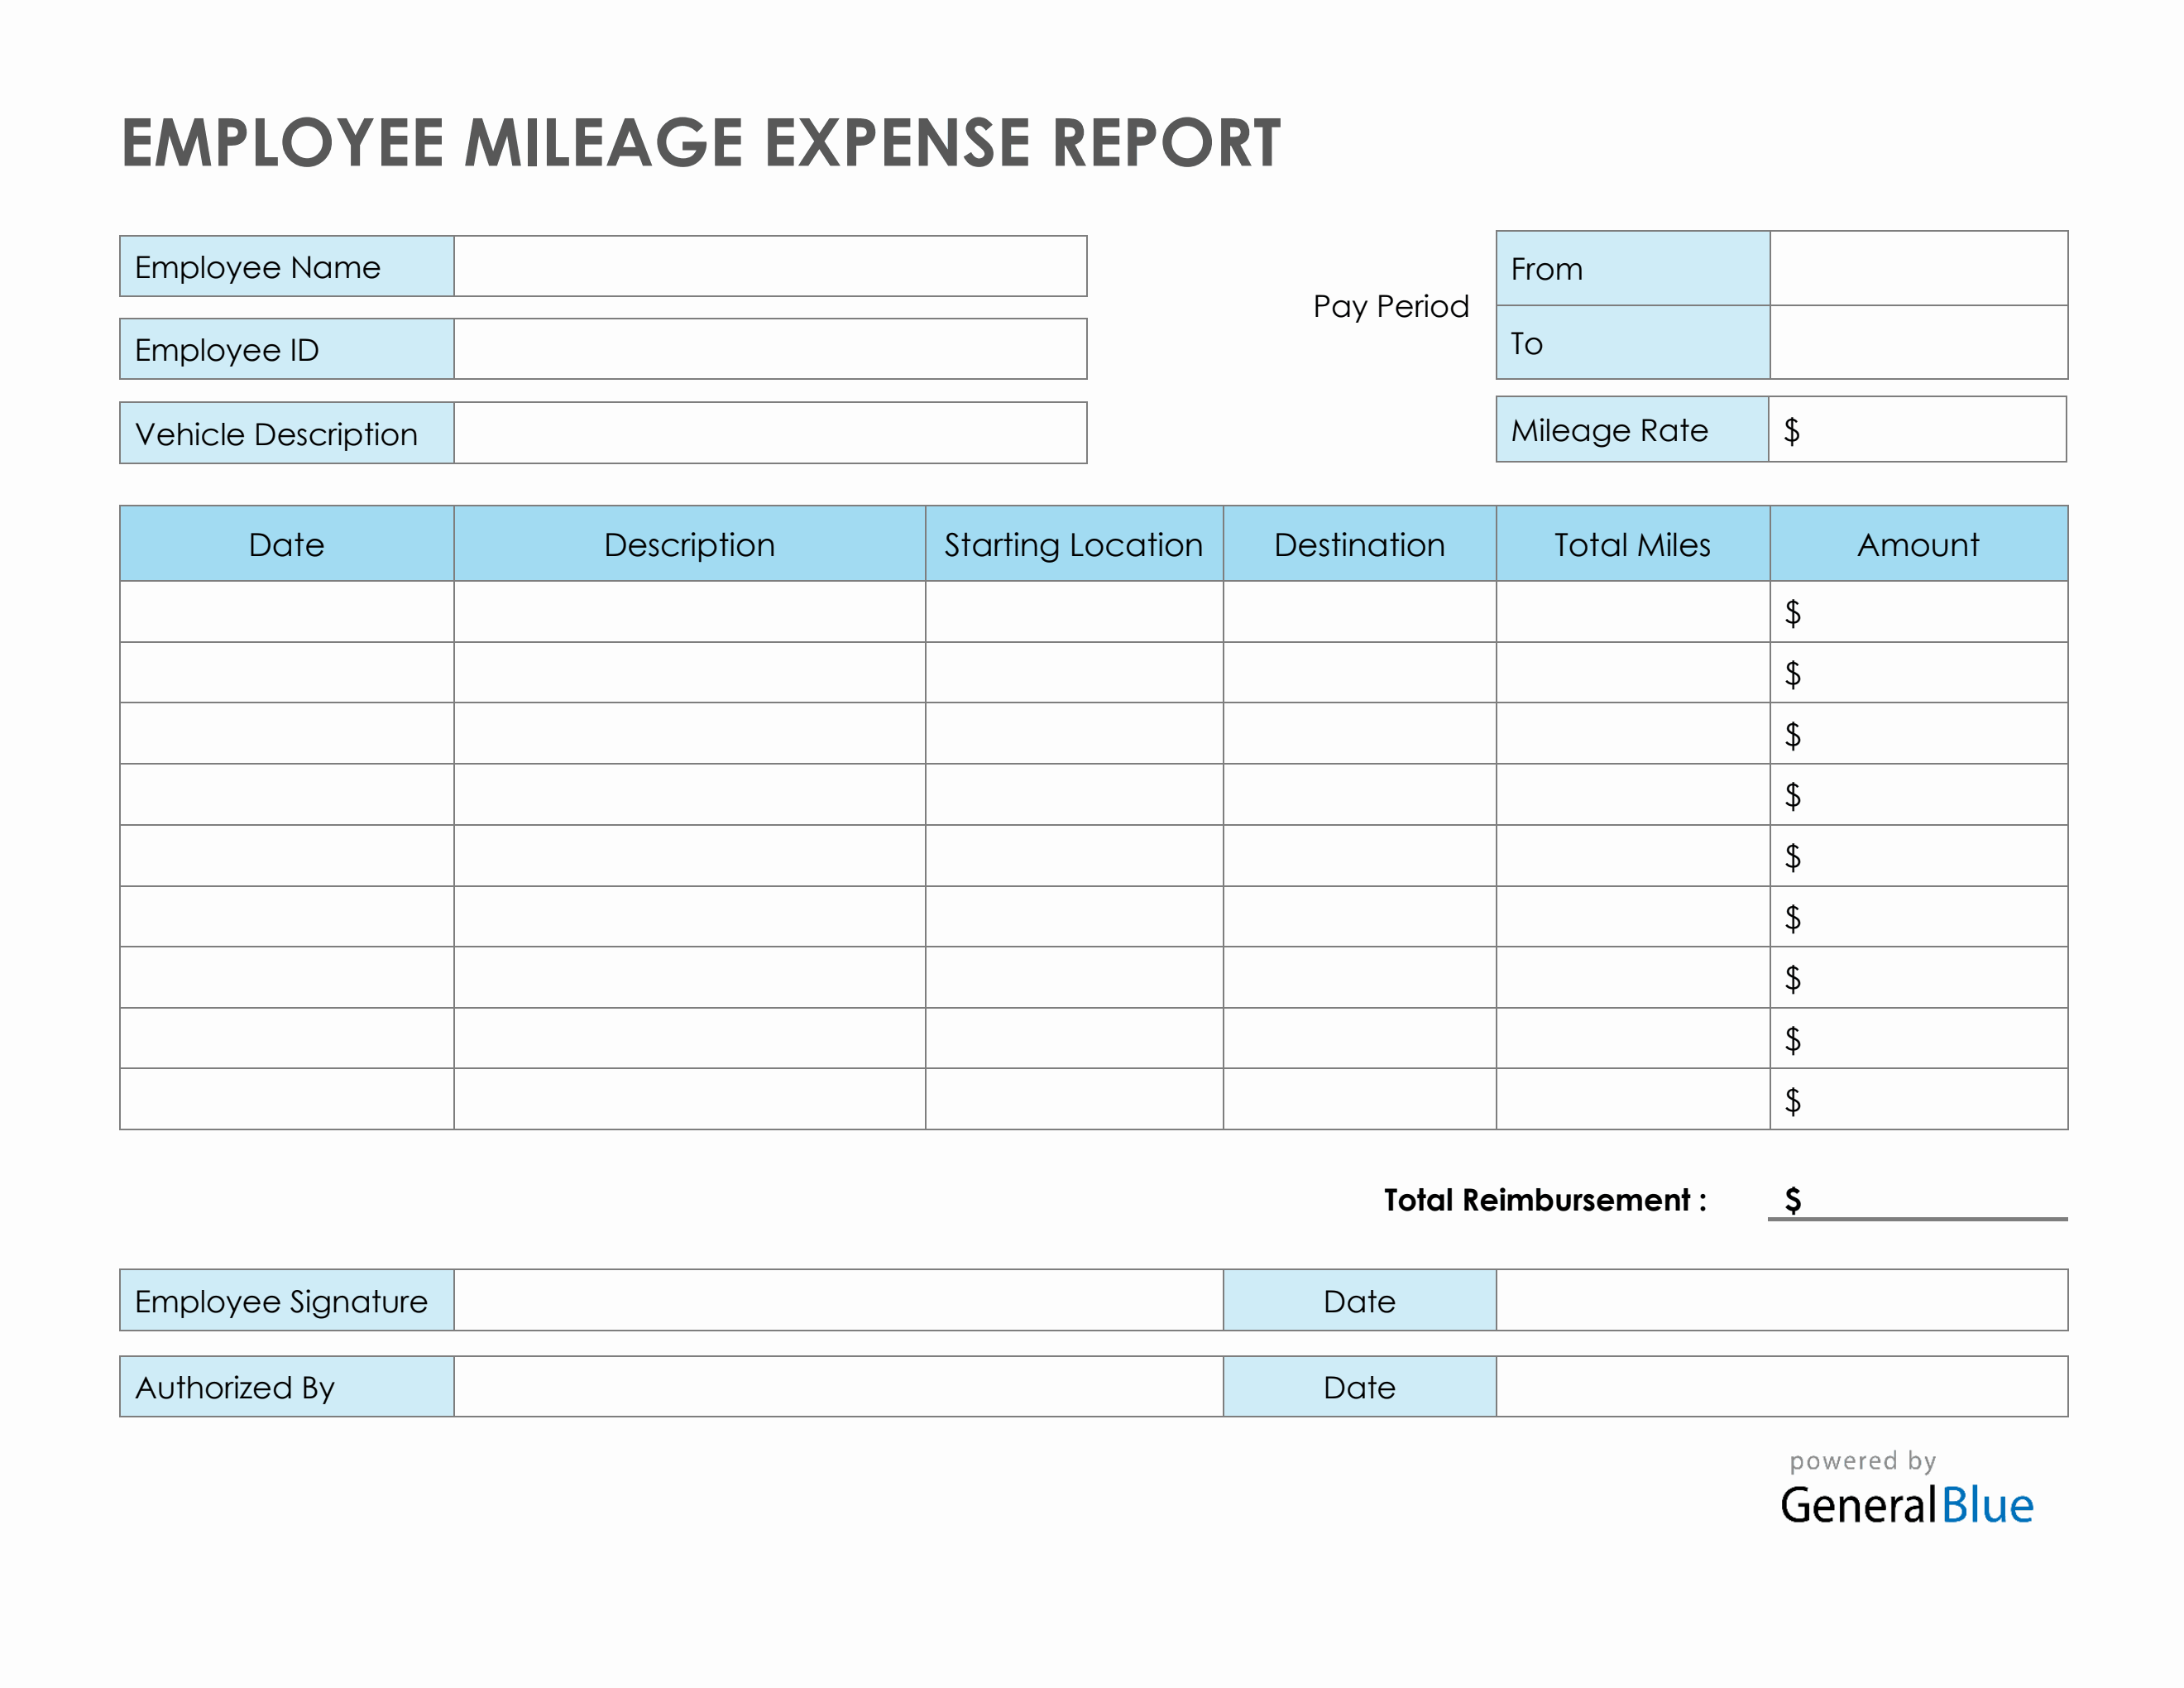 employee-mileage-expense-report-template-in-pdf